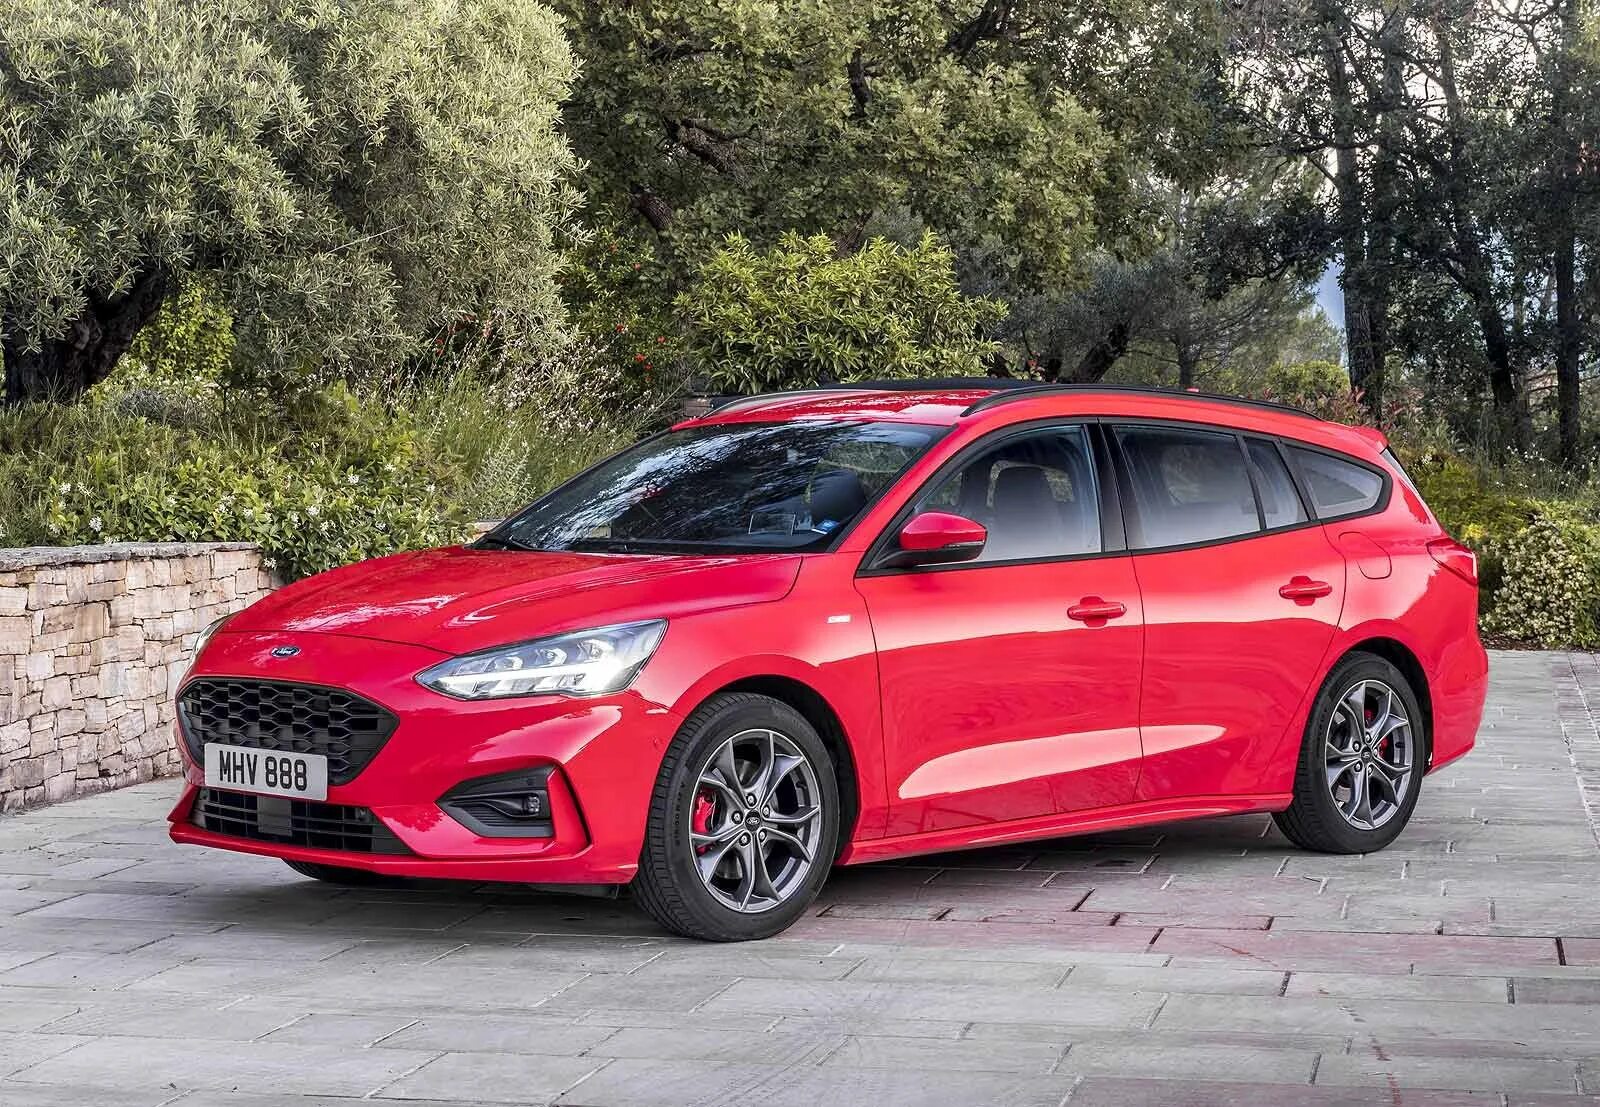 Ford Focus Wagon 2020. Ford Focus 4 универсал. Ford Focus St Wagon 2020. Ford Focus 5. Форд универсал 2019